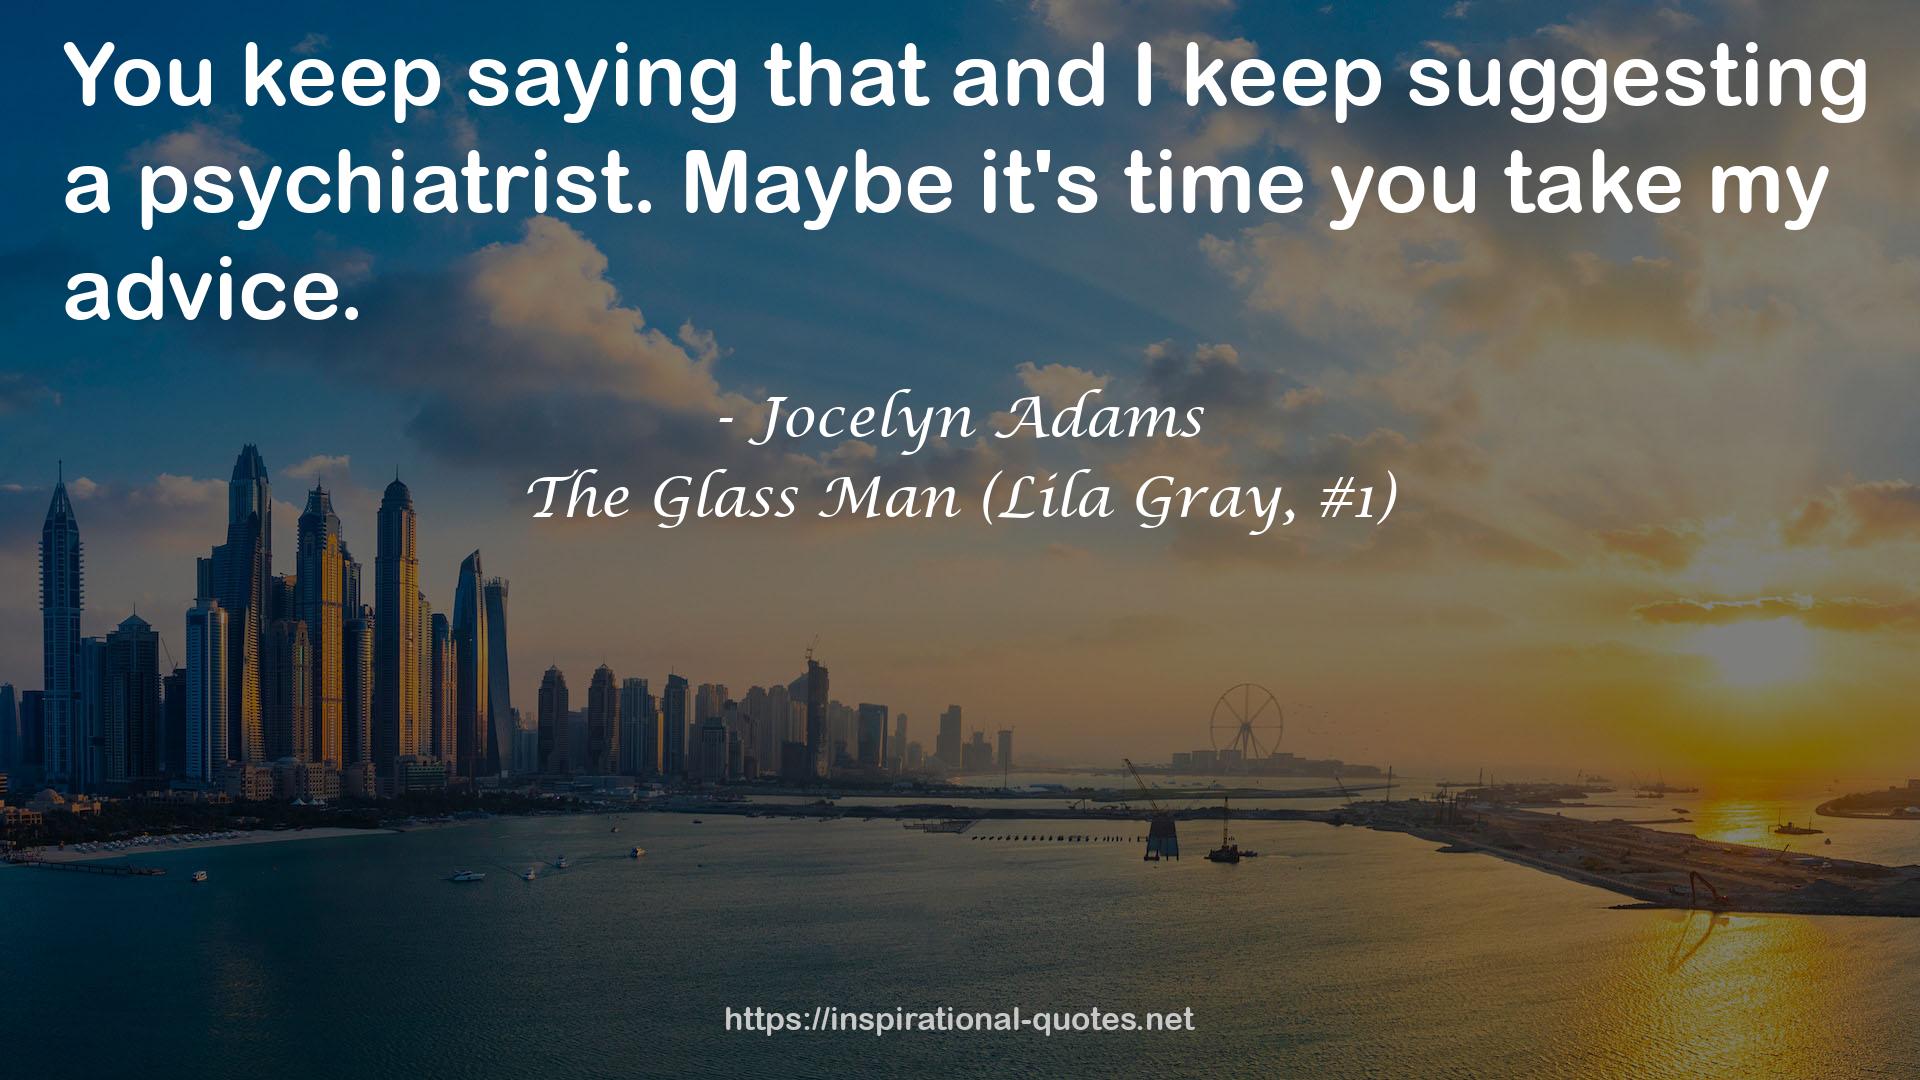 The Glass Man (Lila Gray, #1) QUOTES